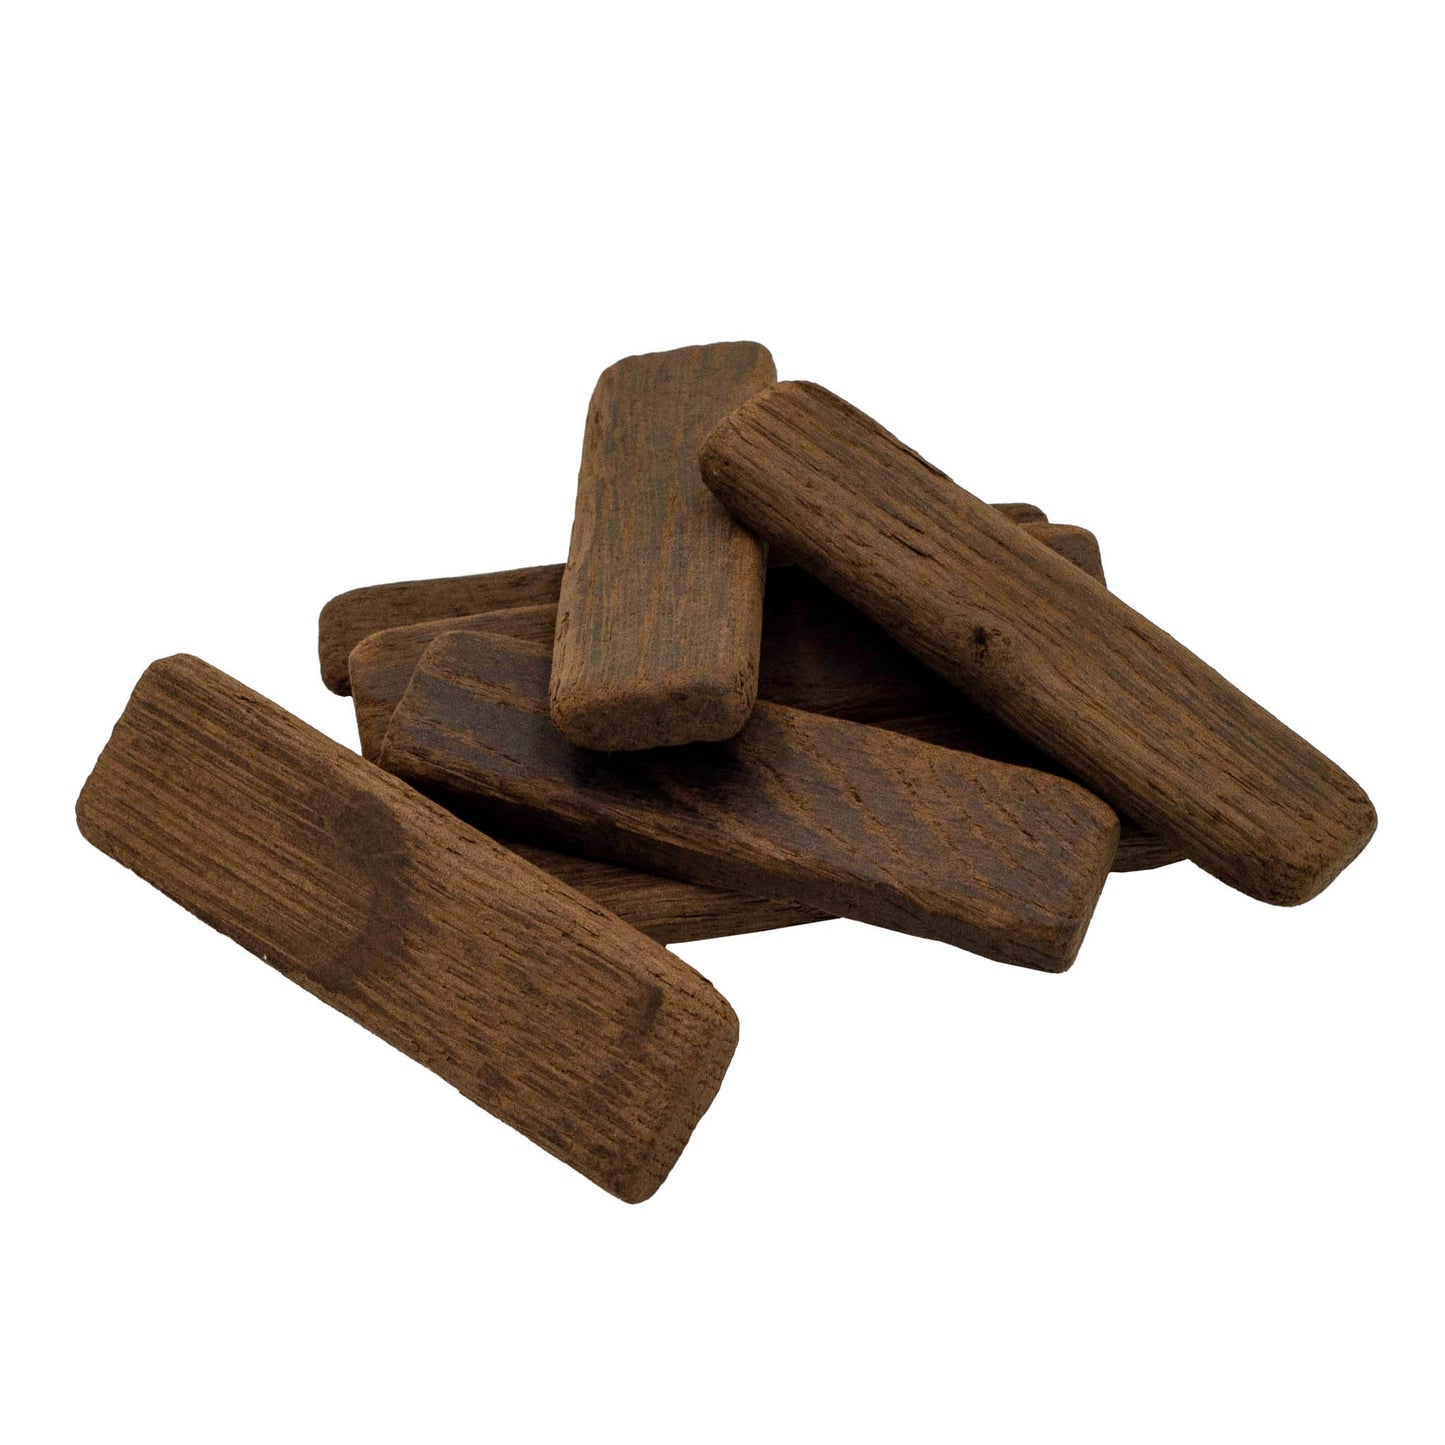 1kg bag of american oak wood staves to use during wine making. 